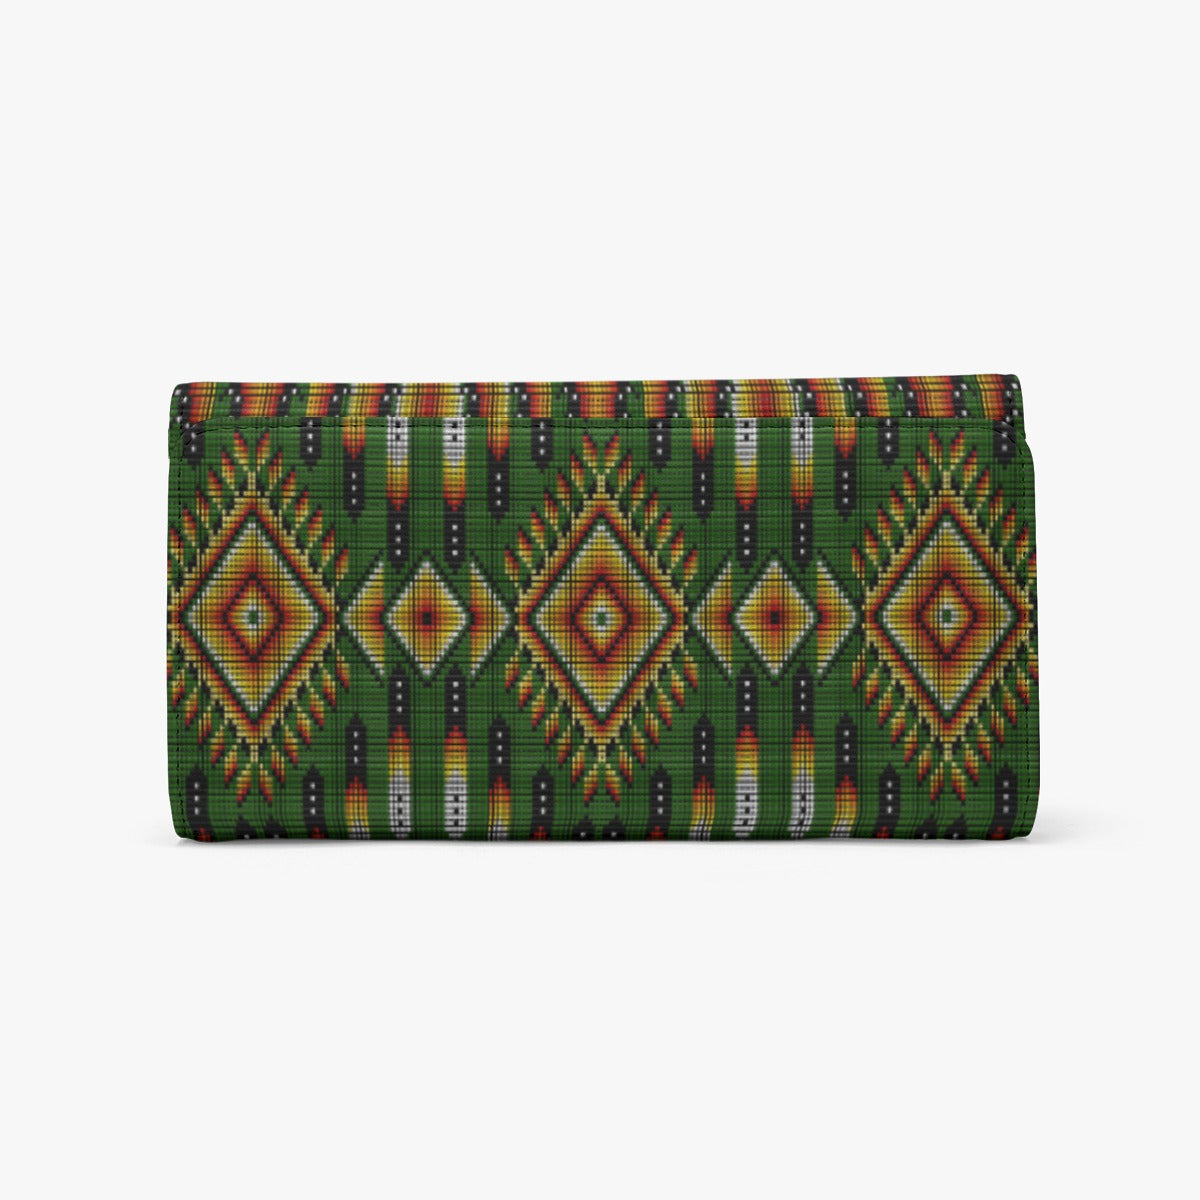 Fire Feather Green Foldable Wallet